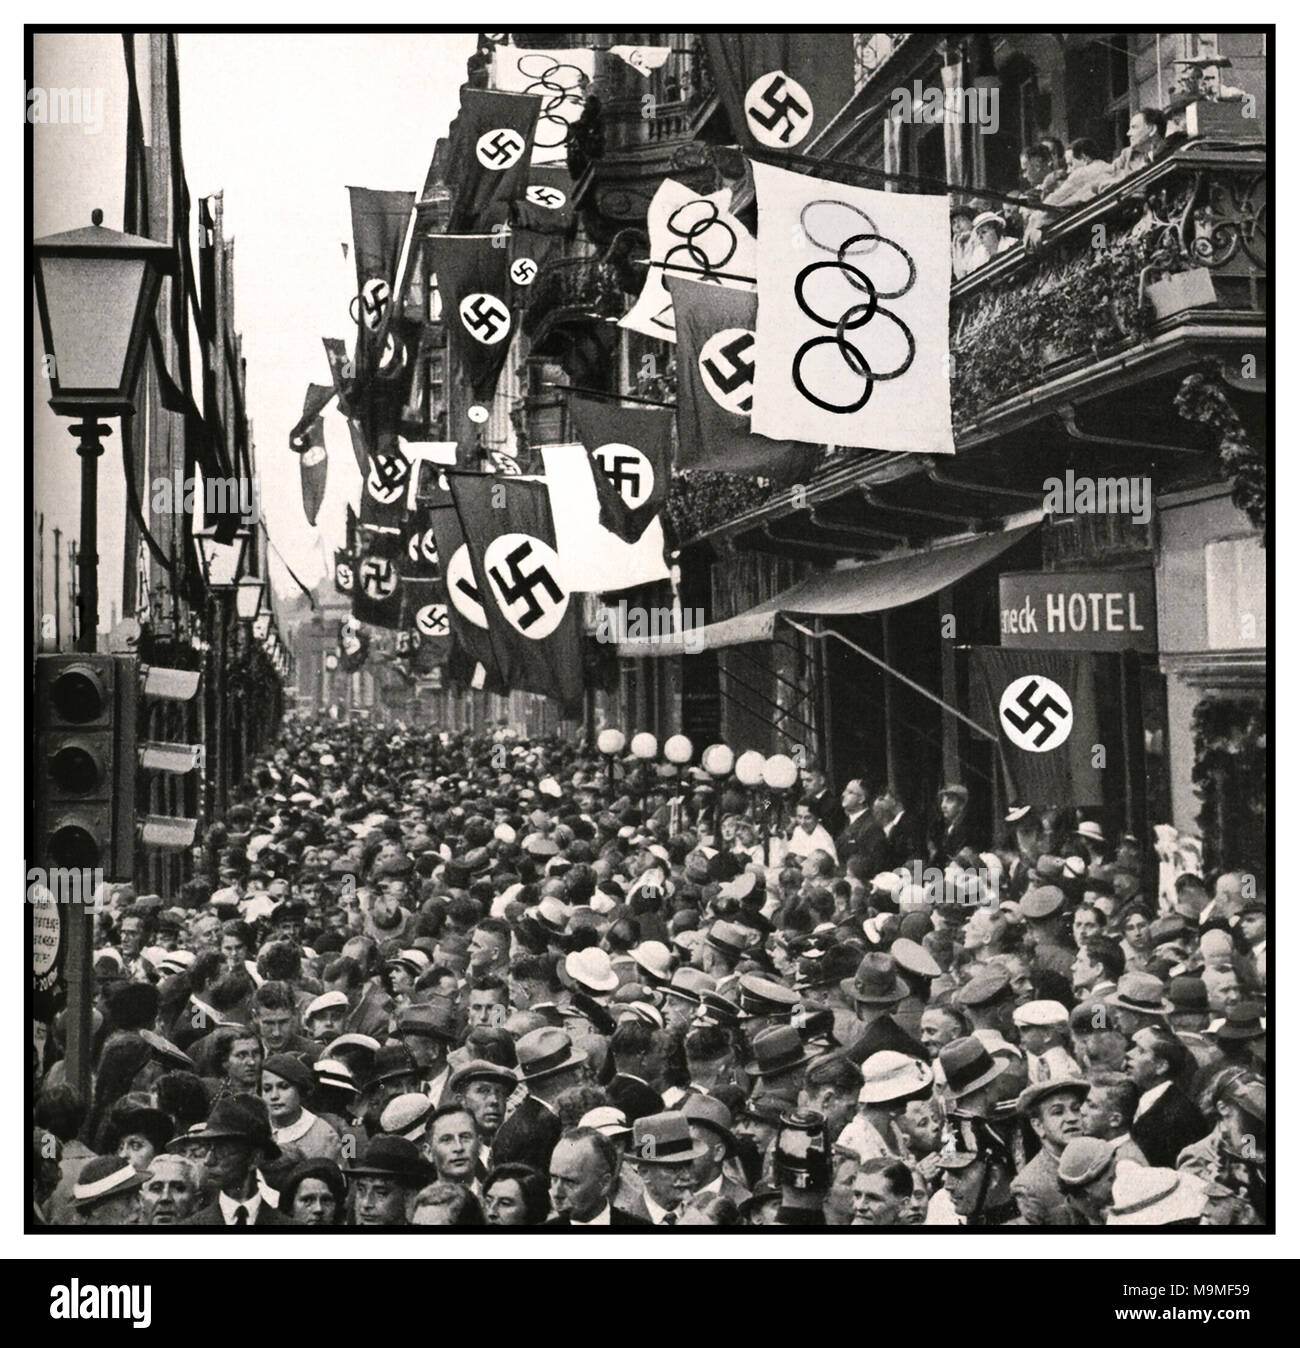 Nazi Olympic Games 1936 Berlin Street Crowds celebrations with Swastikas & The Olympic Rings Flags. Vintage B&W image of a crowded street in Berlin with Swastikas and Olympic flags flying, celebrating the 1936 Olympics in Berlin Germany, under the government controlled Nazi Party. (National Socialist German Workers Party). These Olympic Games offered a unique view into Germany and the Nazi movement that had taken control of the country. Stock Photo